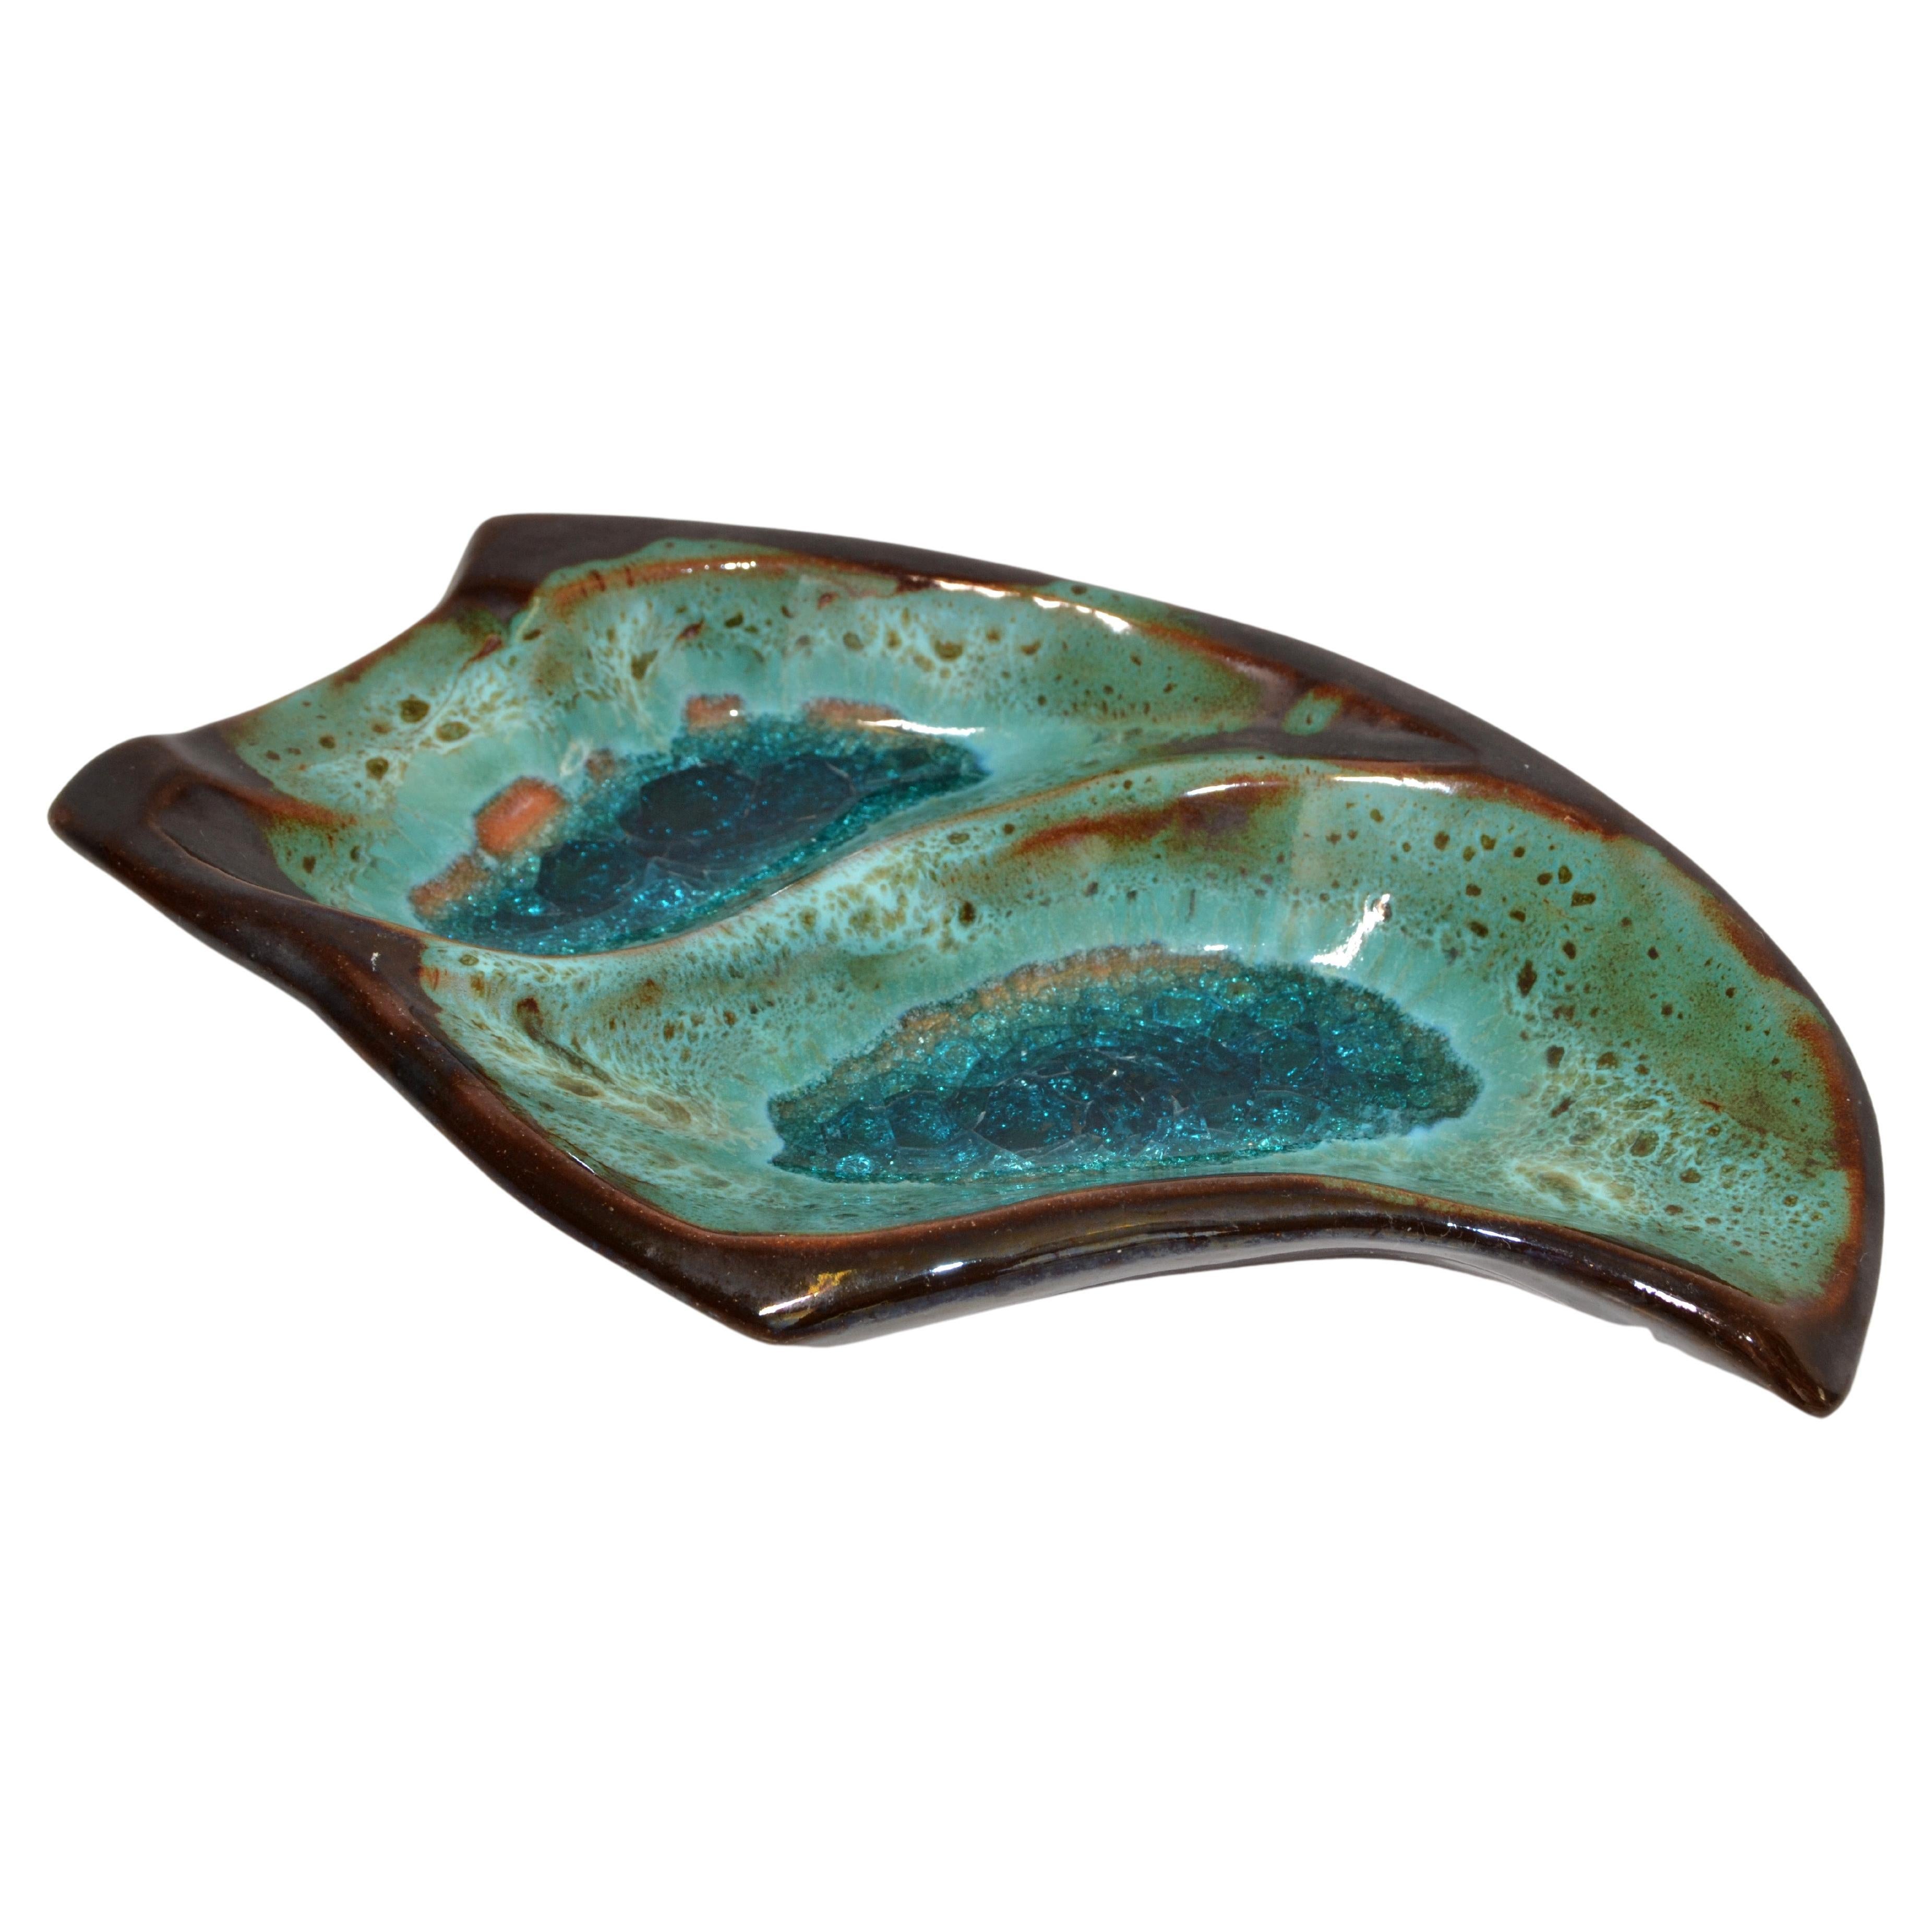 Pottery Ceramic Decorative Bowl Brown and Turquoise Vide Poche Blue Mineral 1960 For Sale